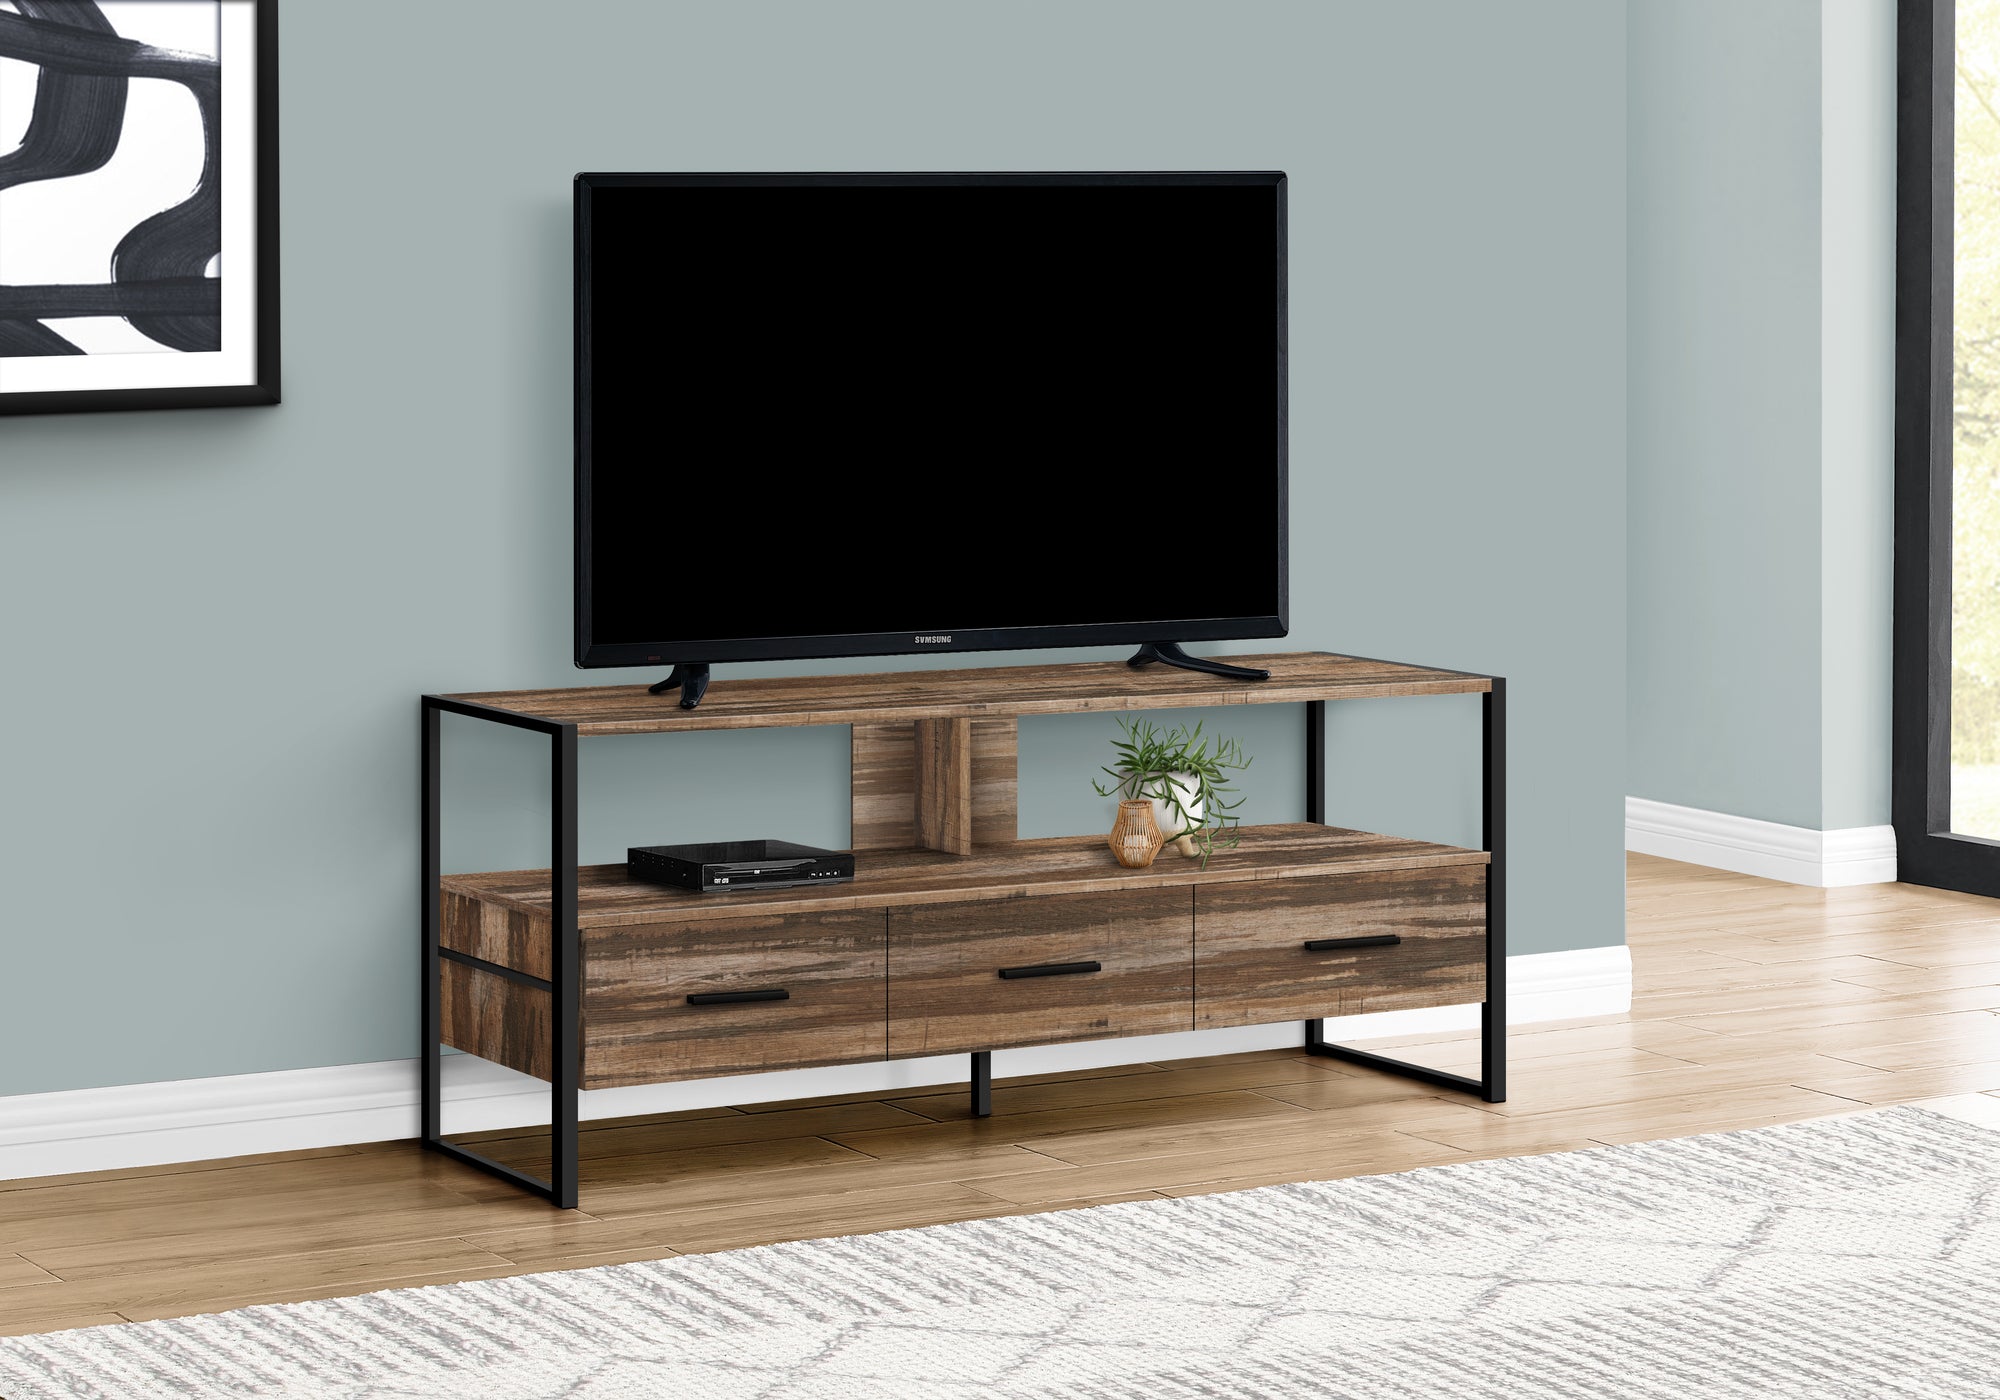 MN-862619    Tv Stand - 3 Storage Drawers / Open Shelf - 48"L - Brown Reclaimed Wood-Look / Black